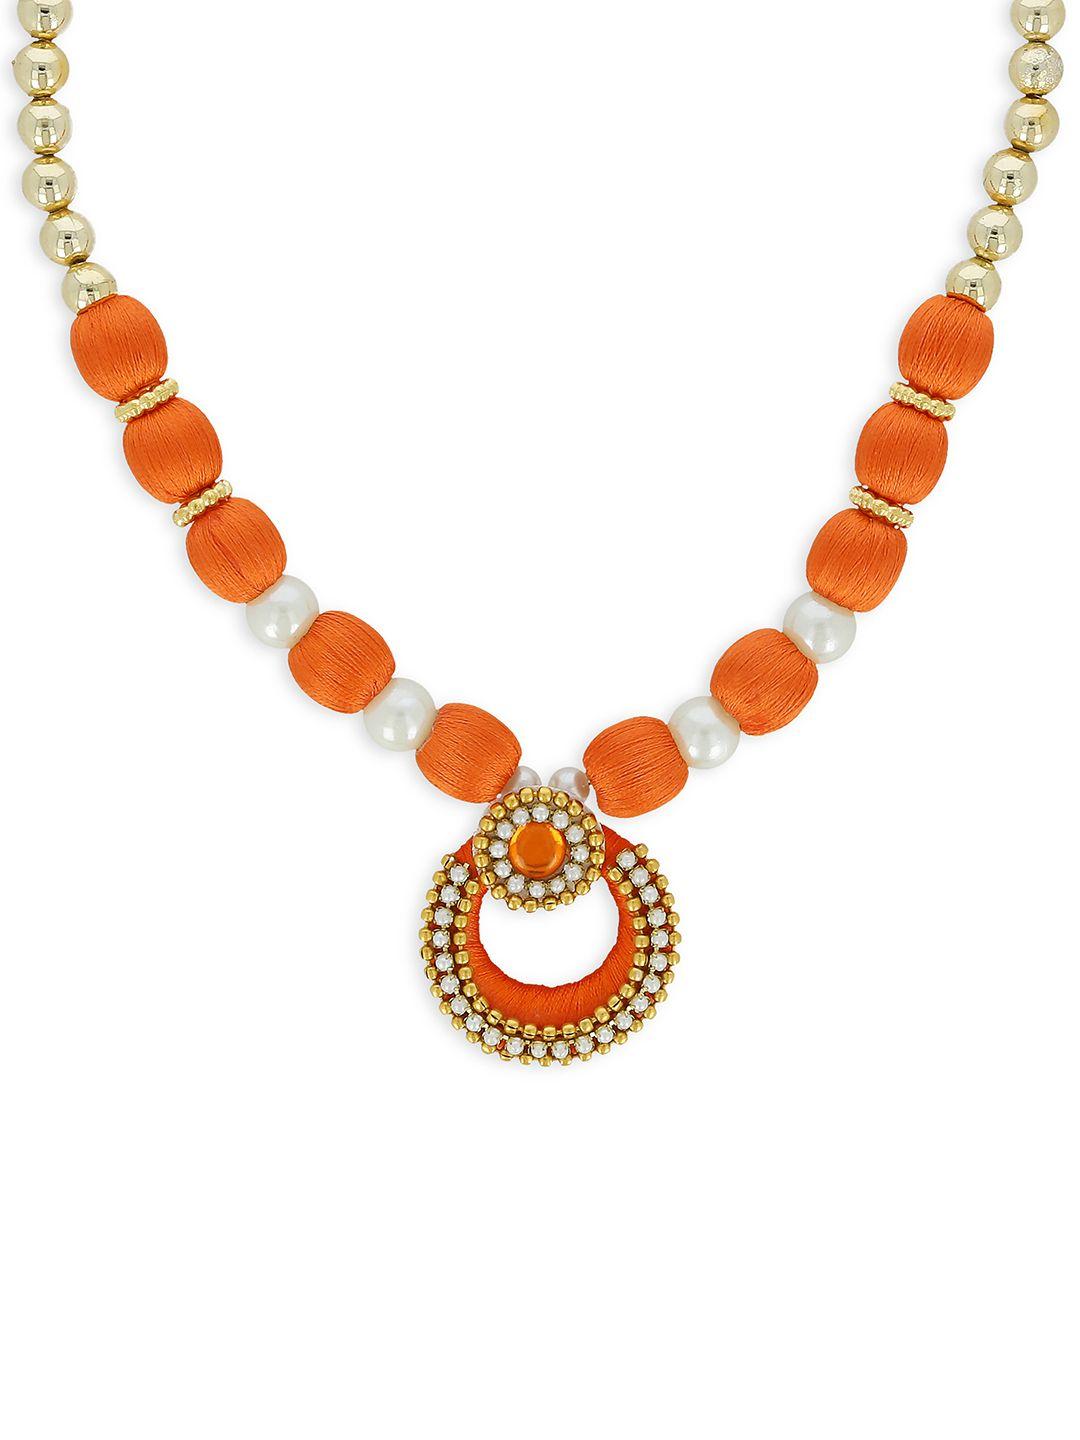 akshara gold-toned and orange handcrafted beaded necklace